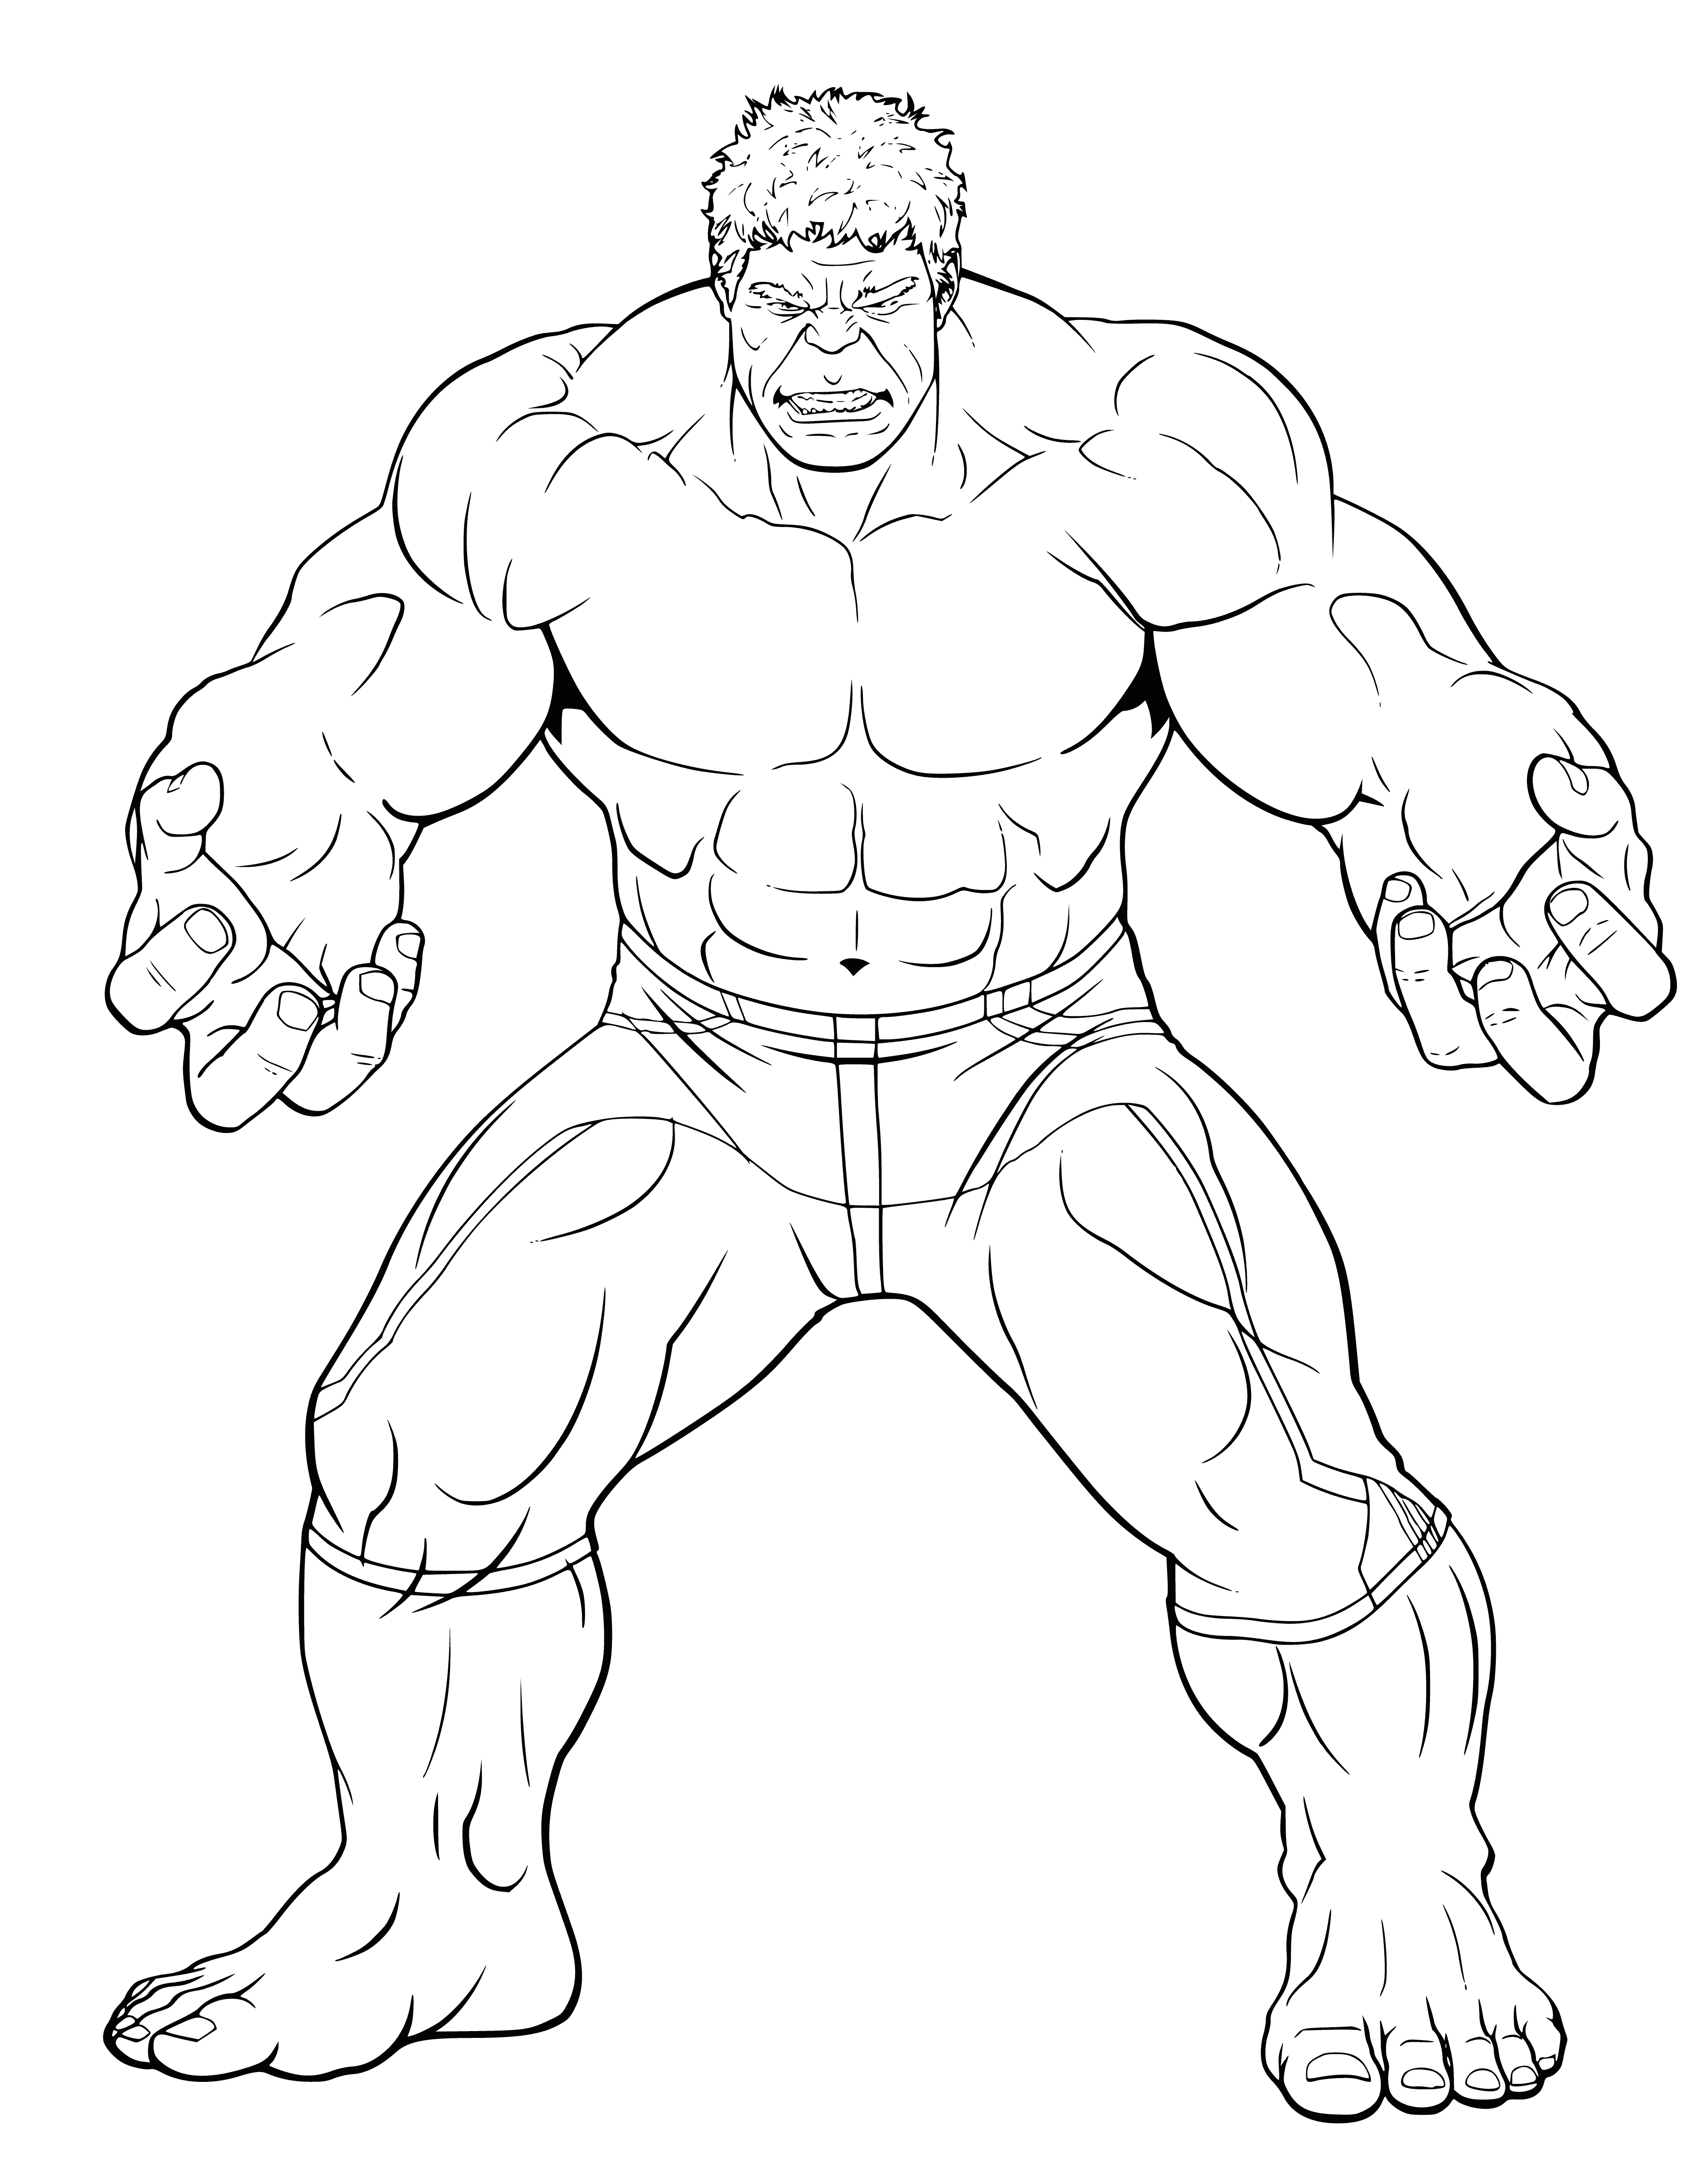 coloring page: The Hulk is an unstoppable Avenger, with immense strength & loyalty who defends and smashes villains. He's a friend to other Avengers, & loyal to the end. #AvengersEndgame